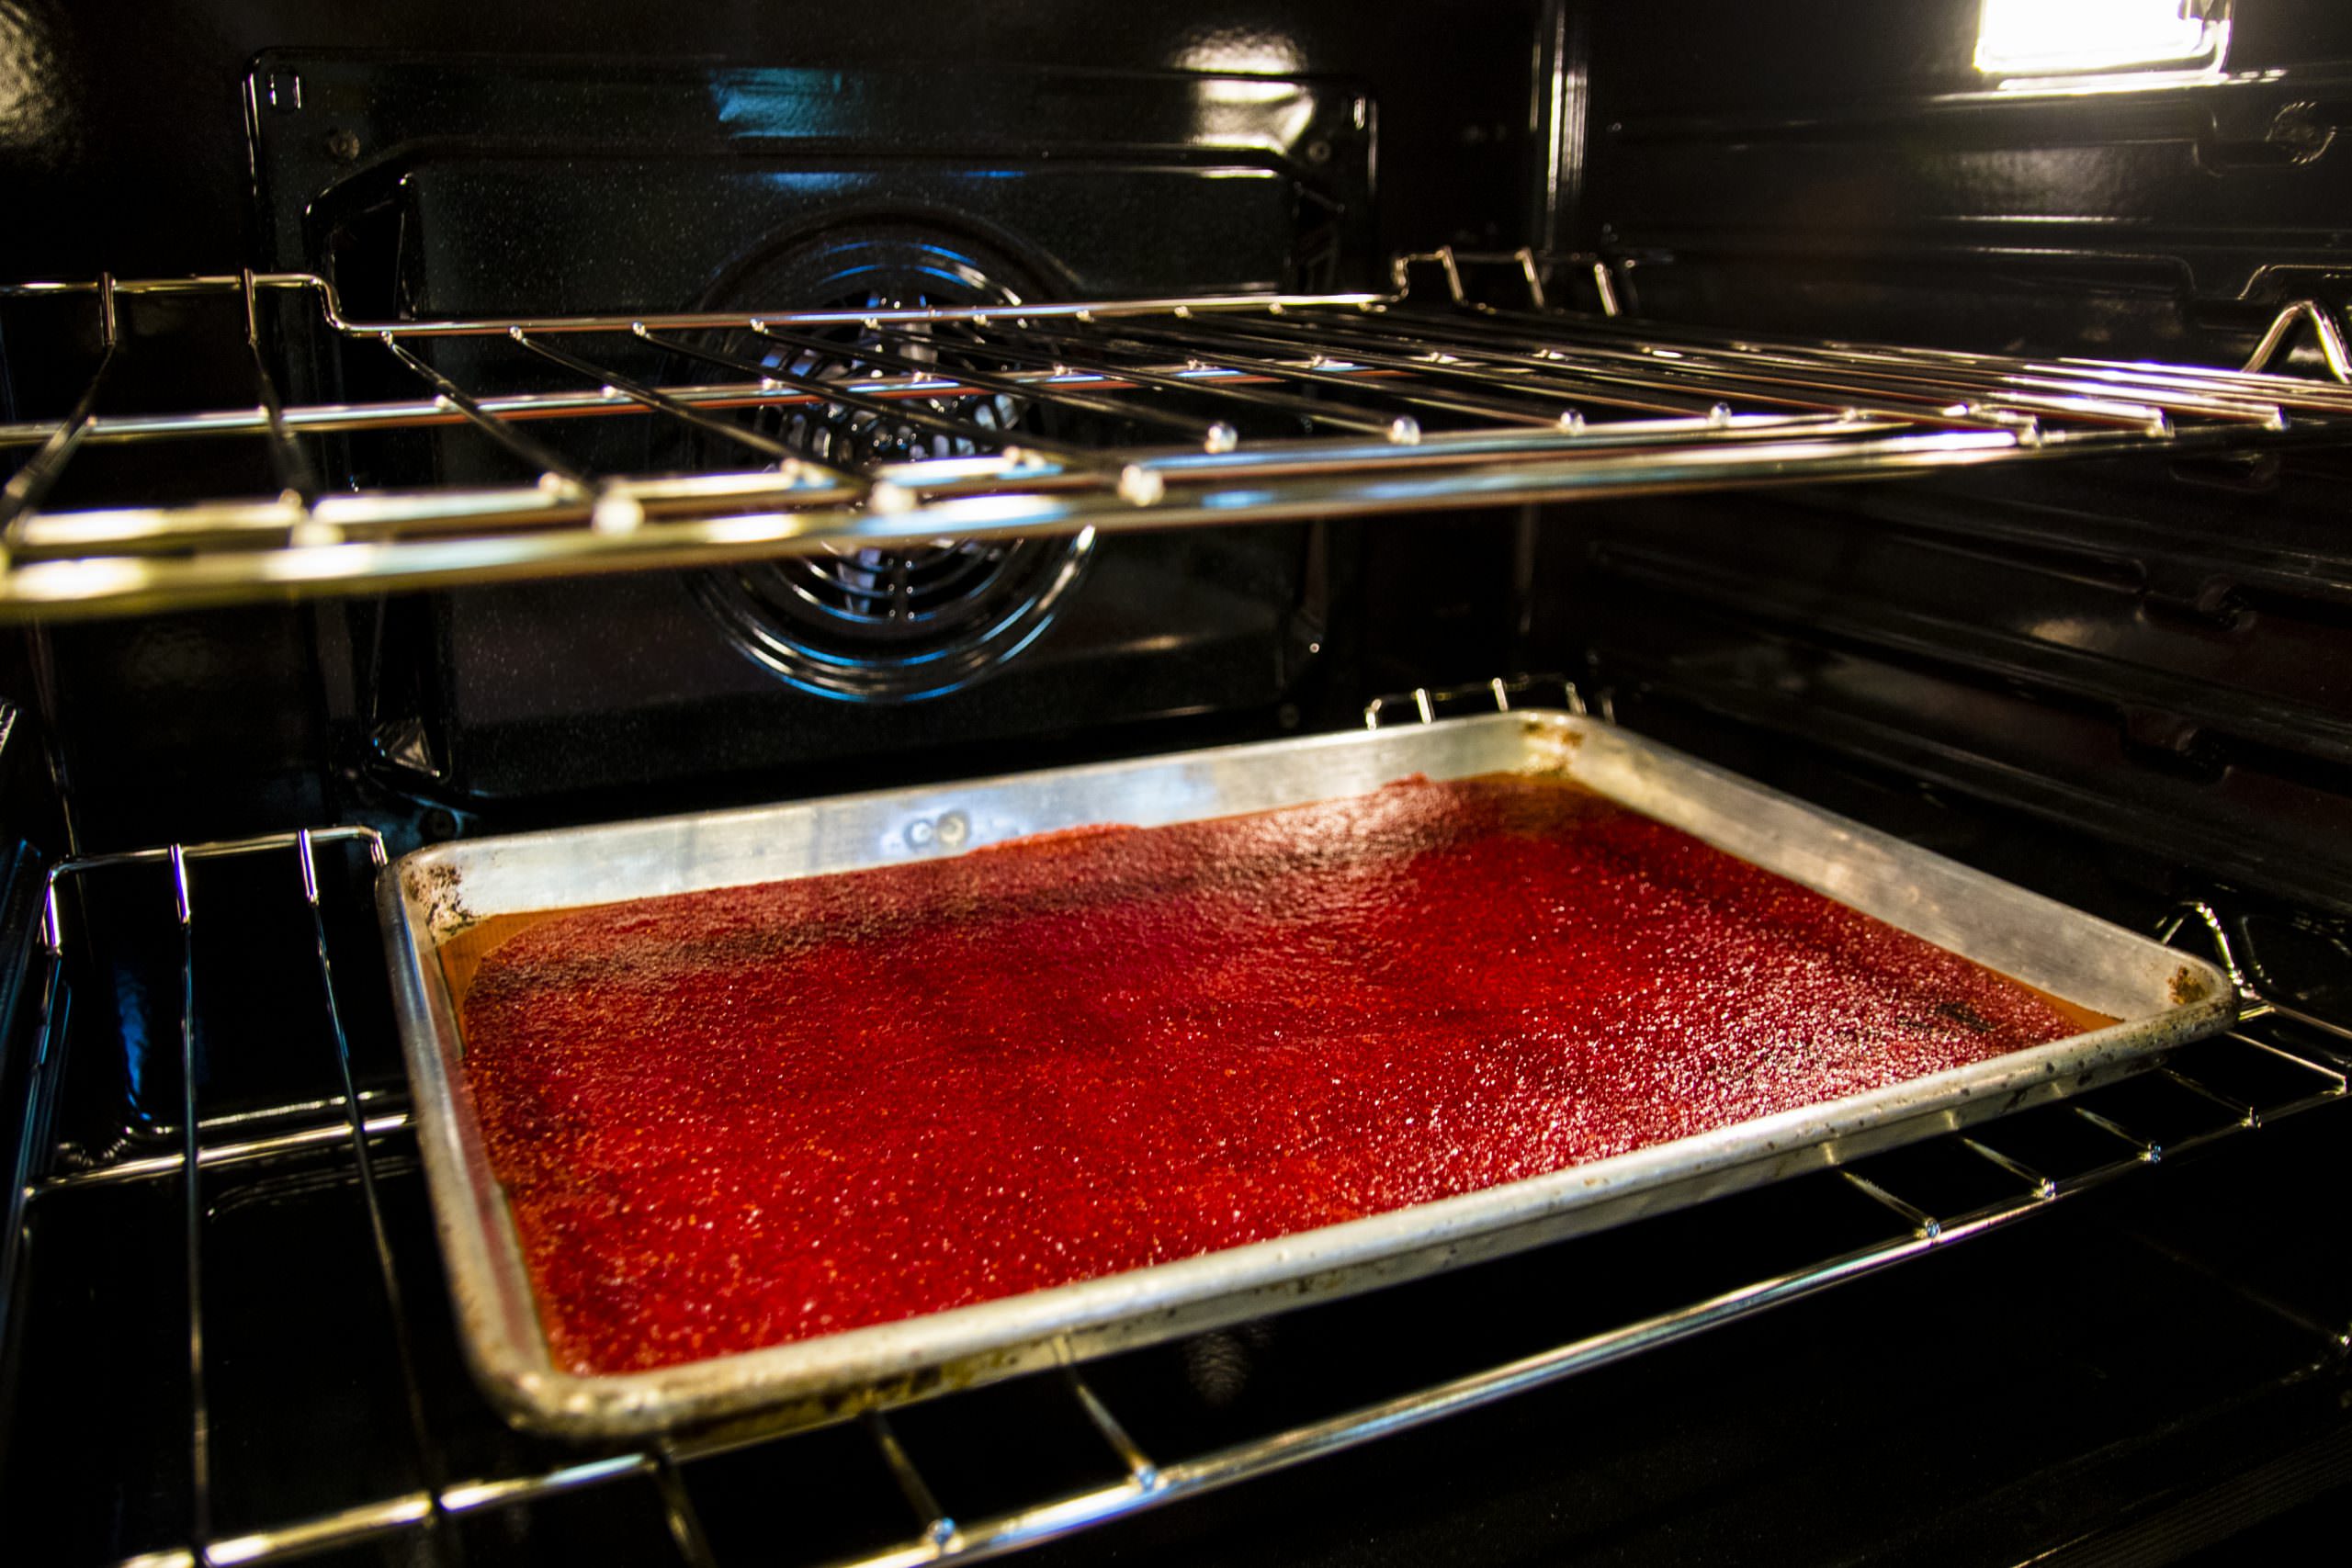 Fruit leather almost finished in oven02